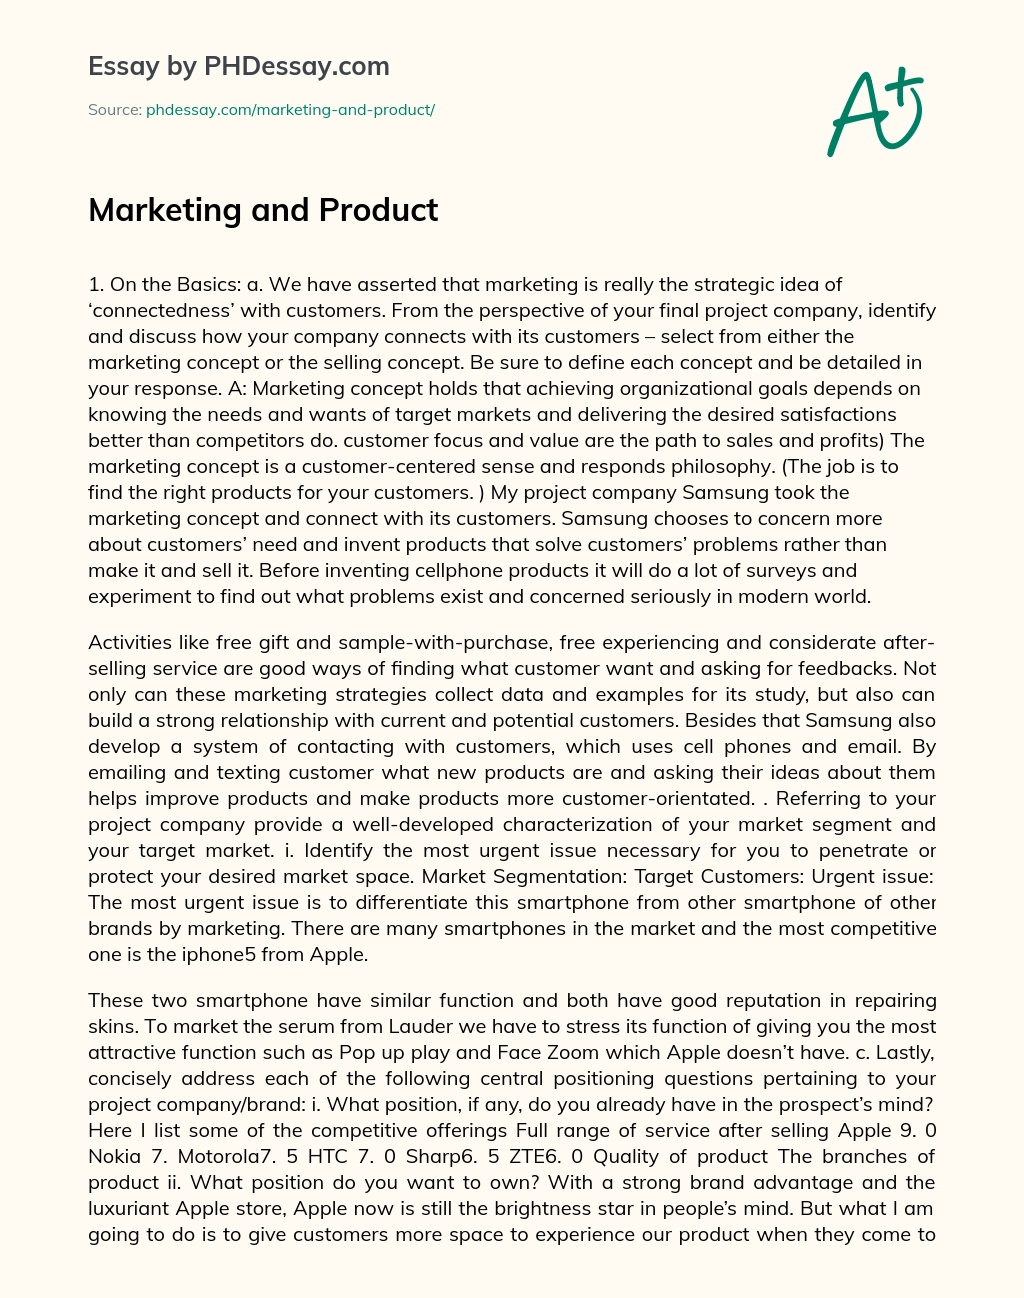 Marketing and Product essay